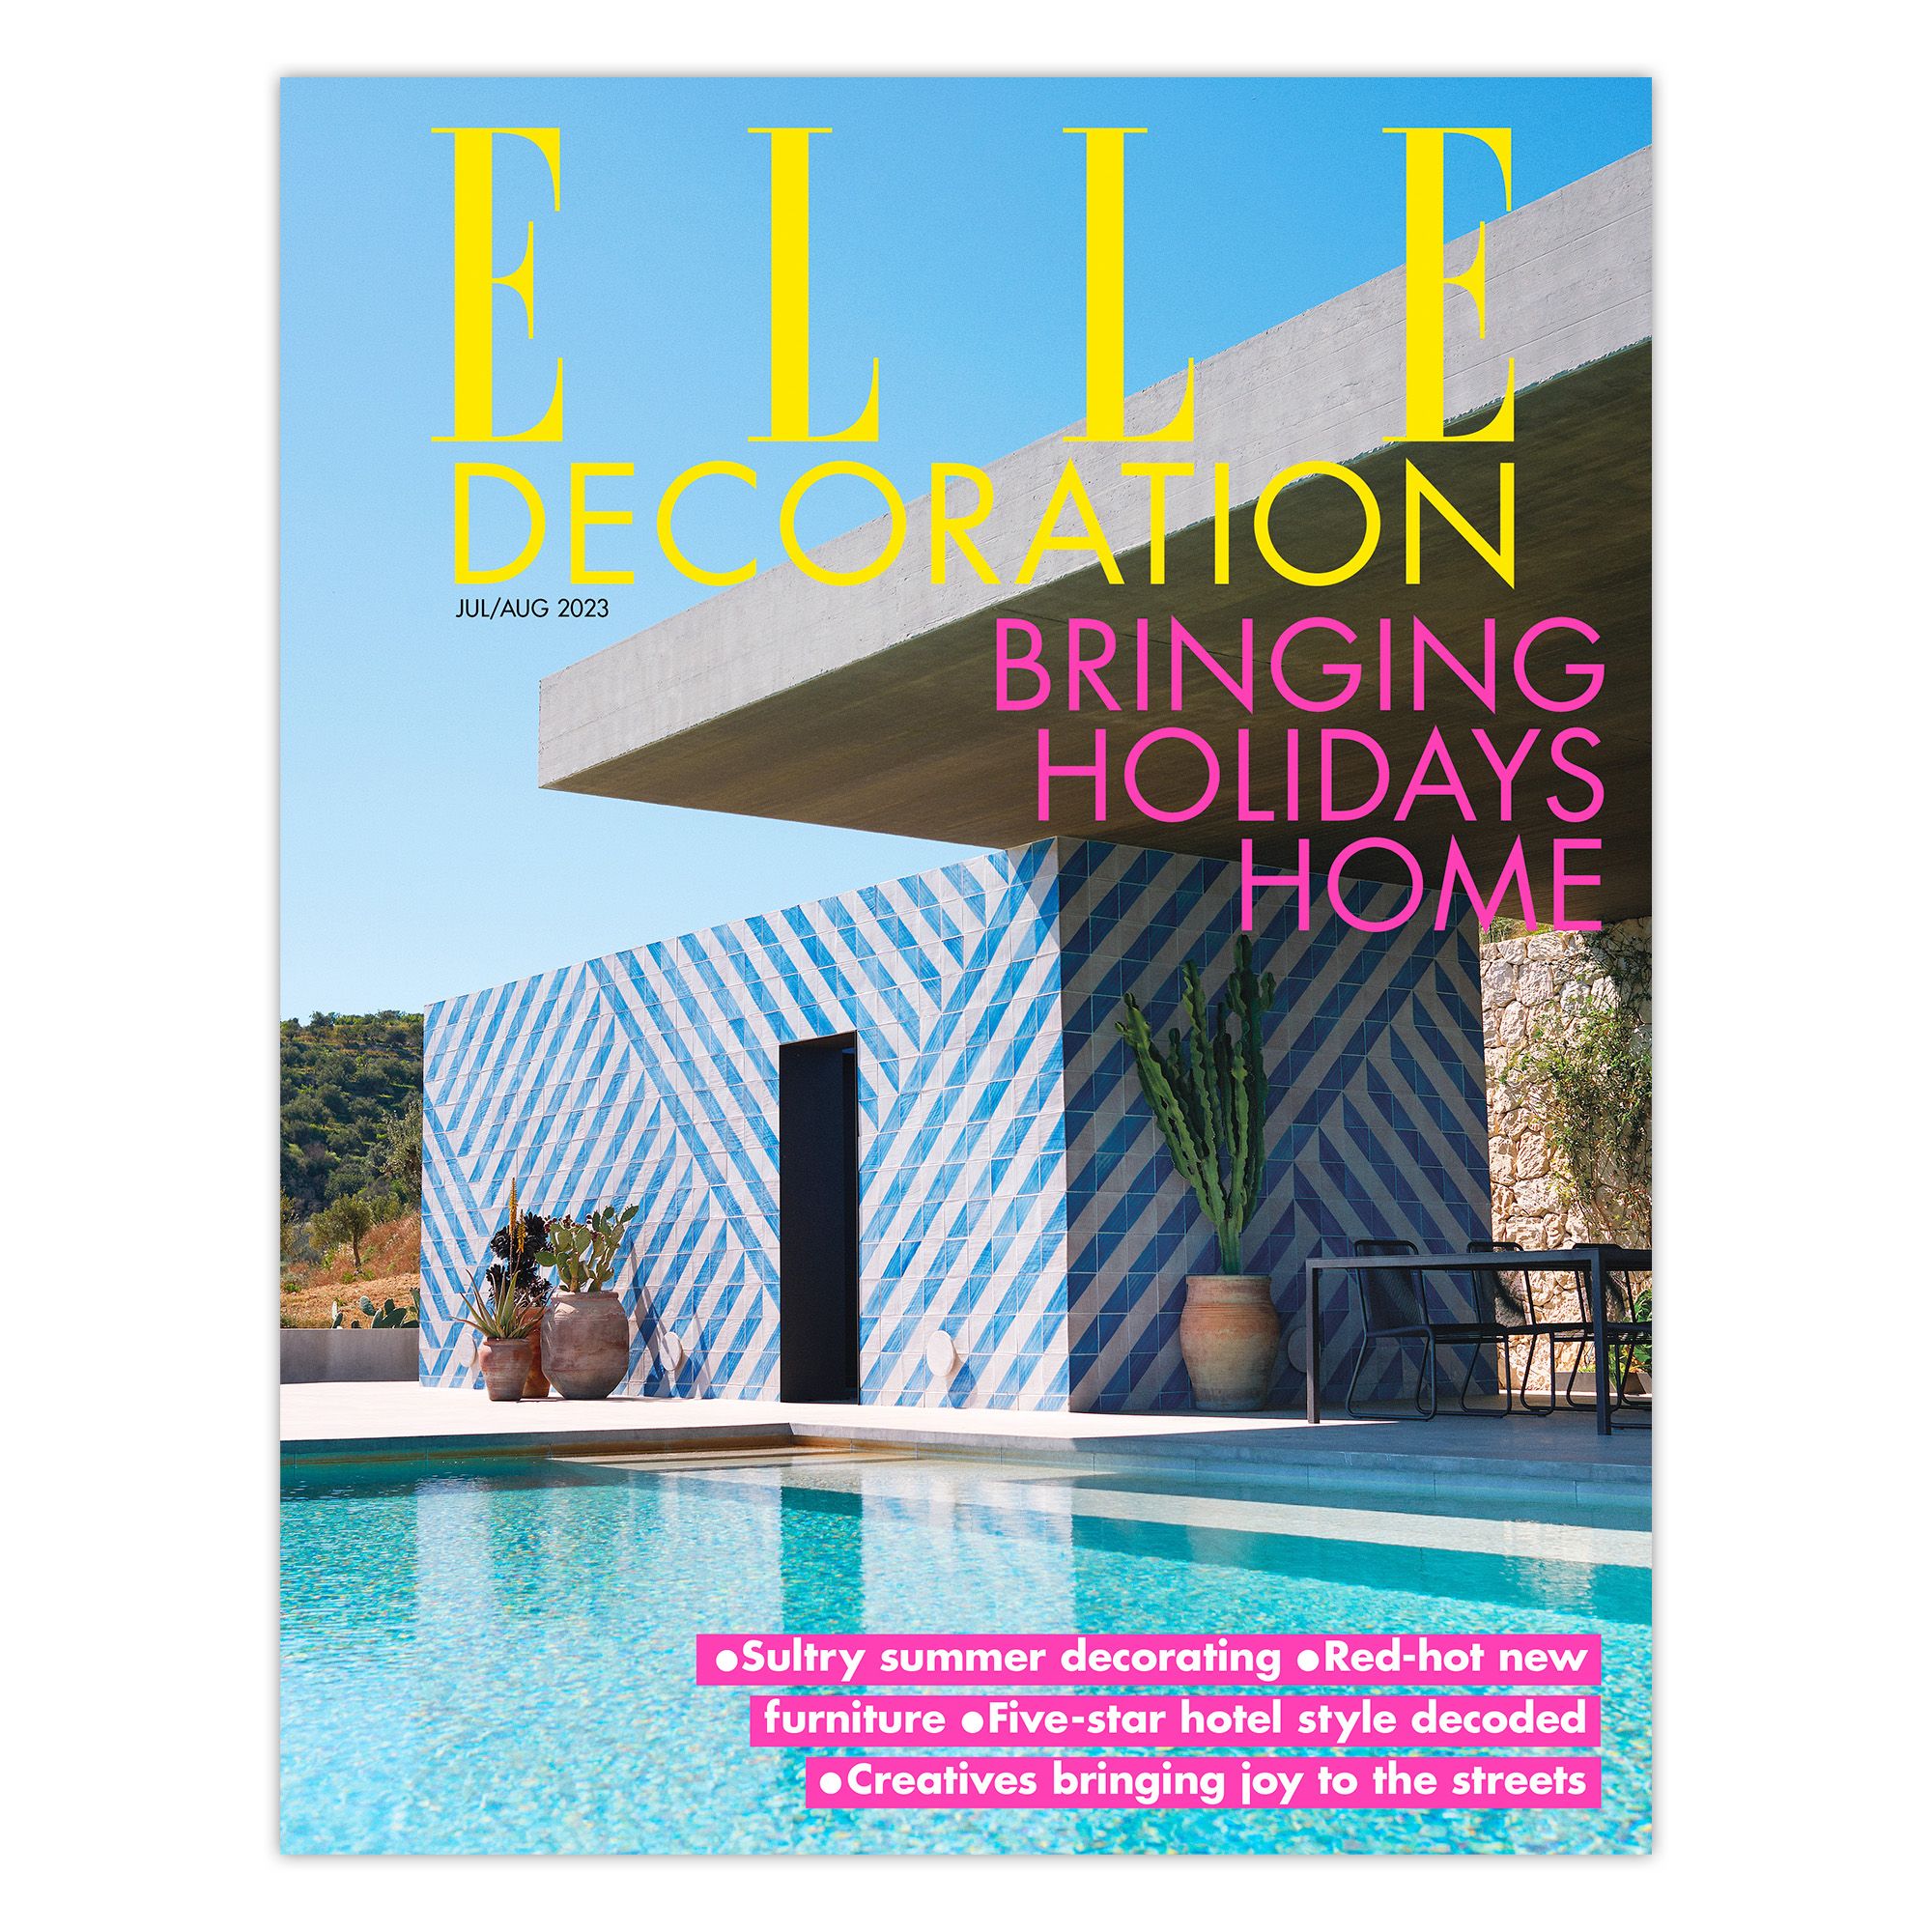 Bring the holiday home with the new July/August issue